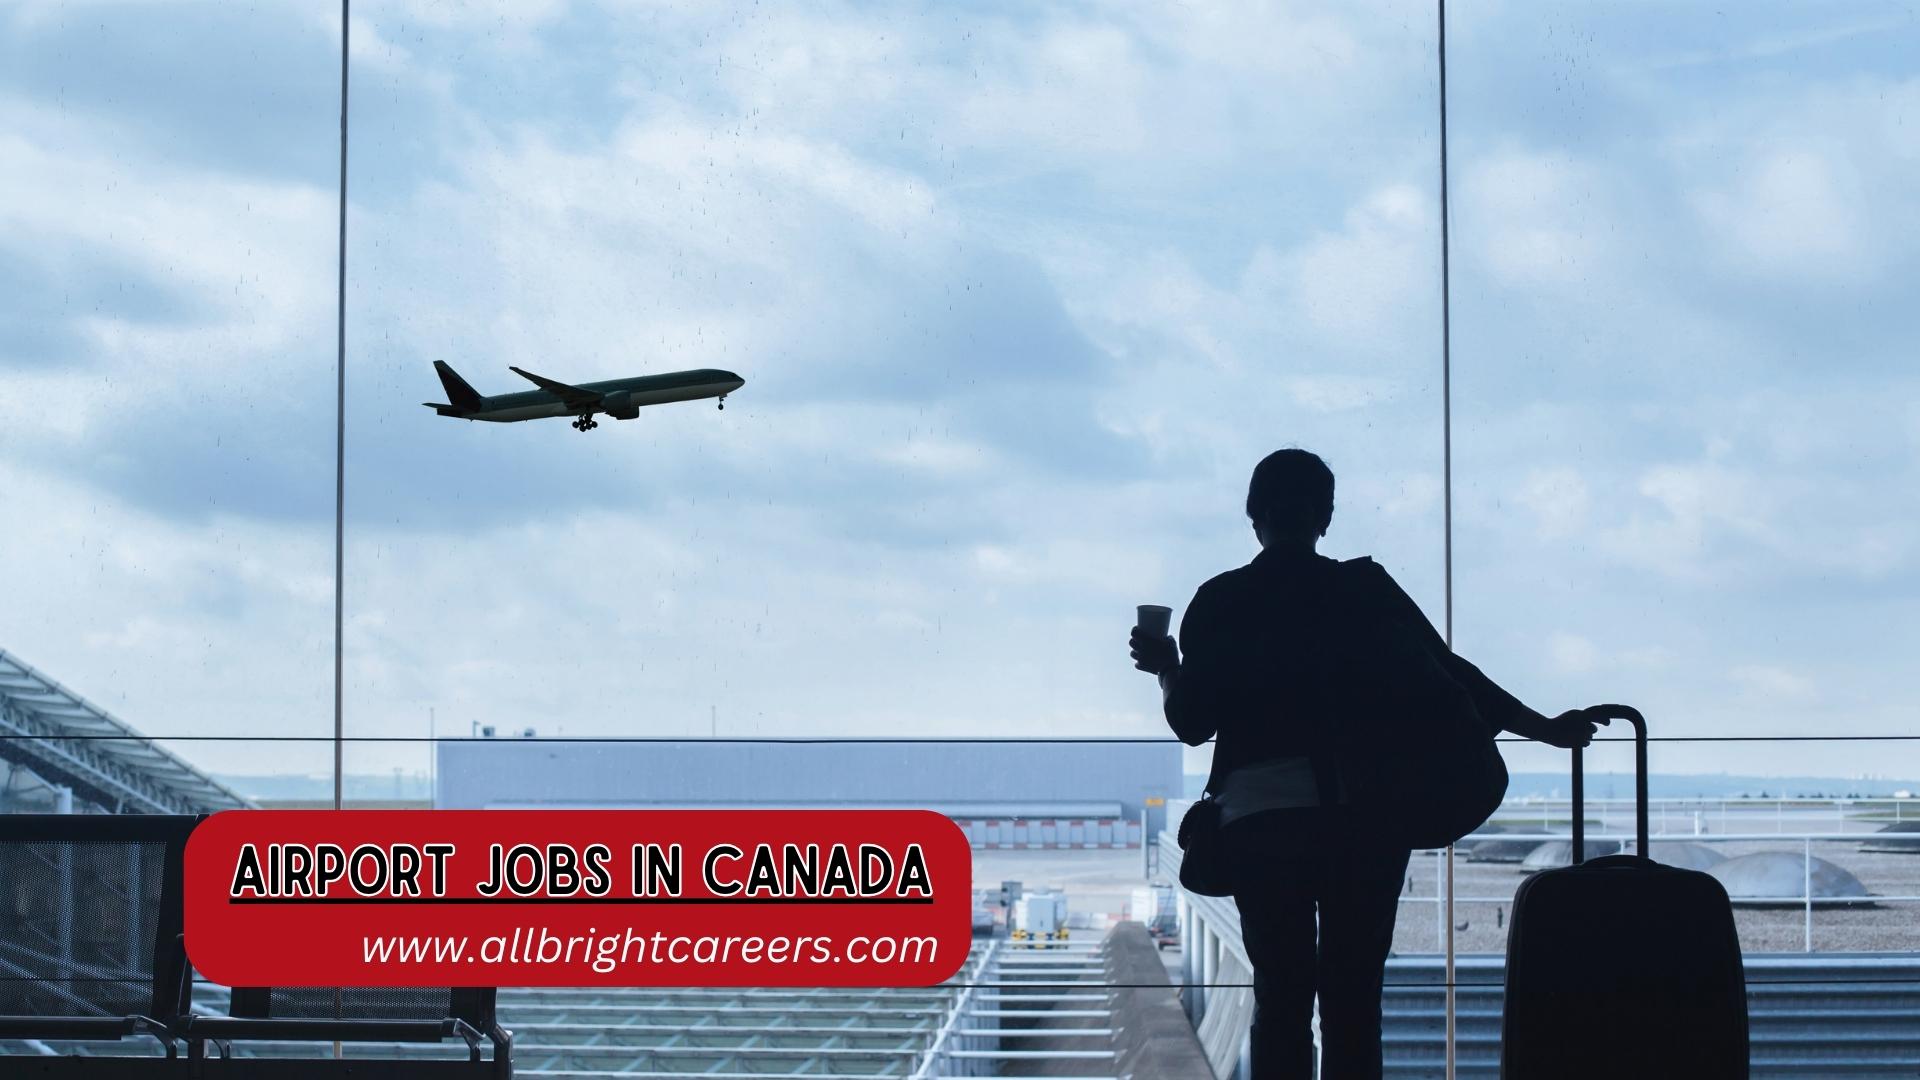 Airport jobs in Canada